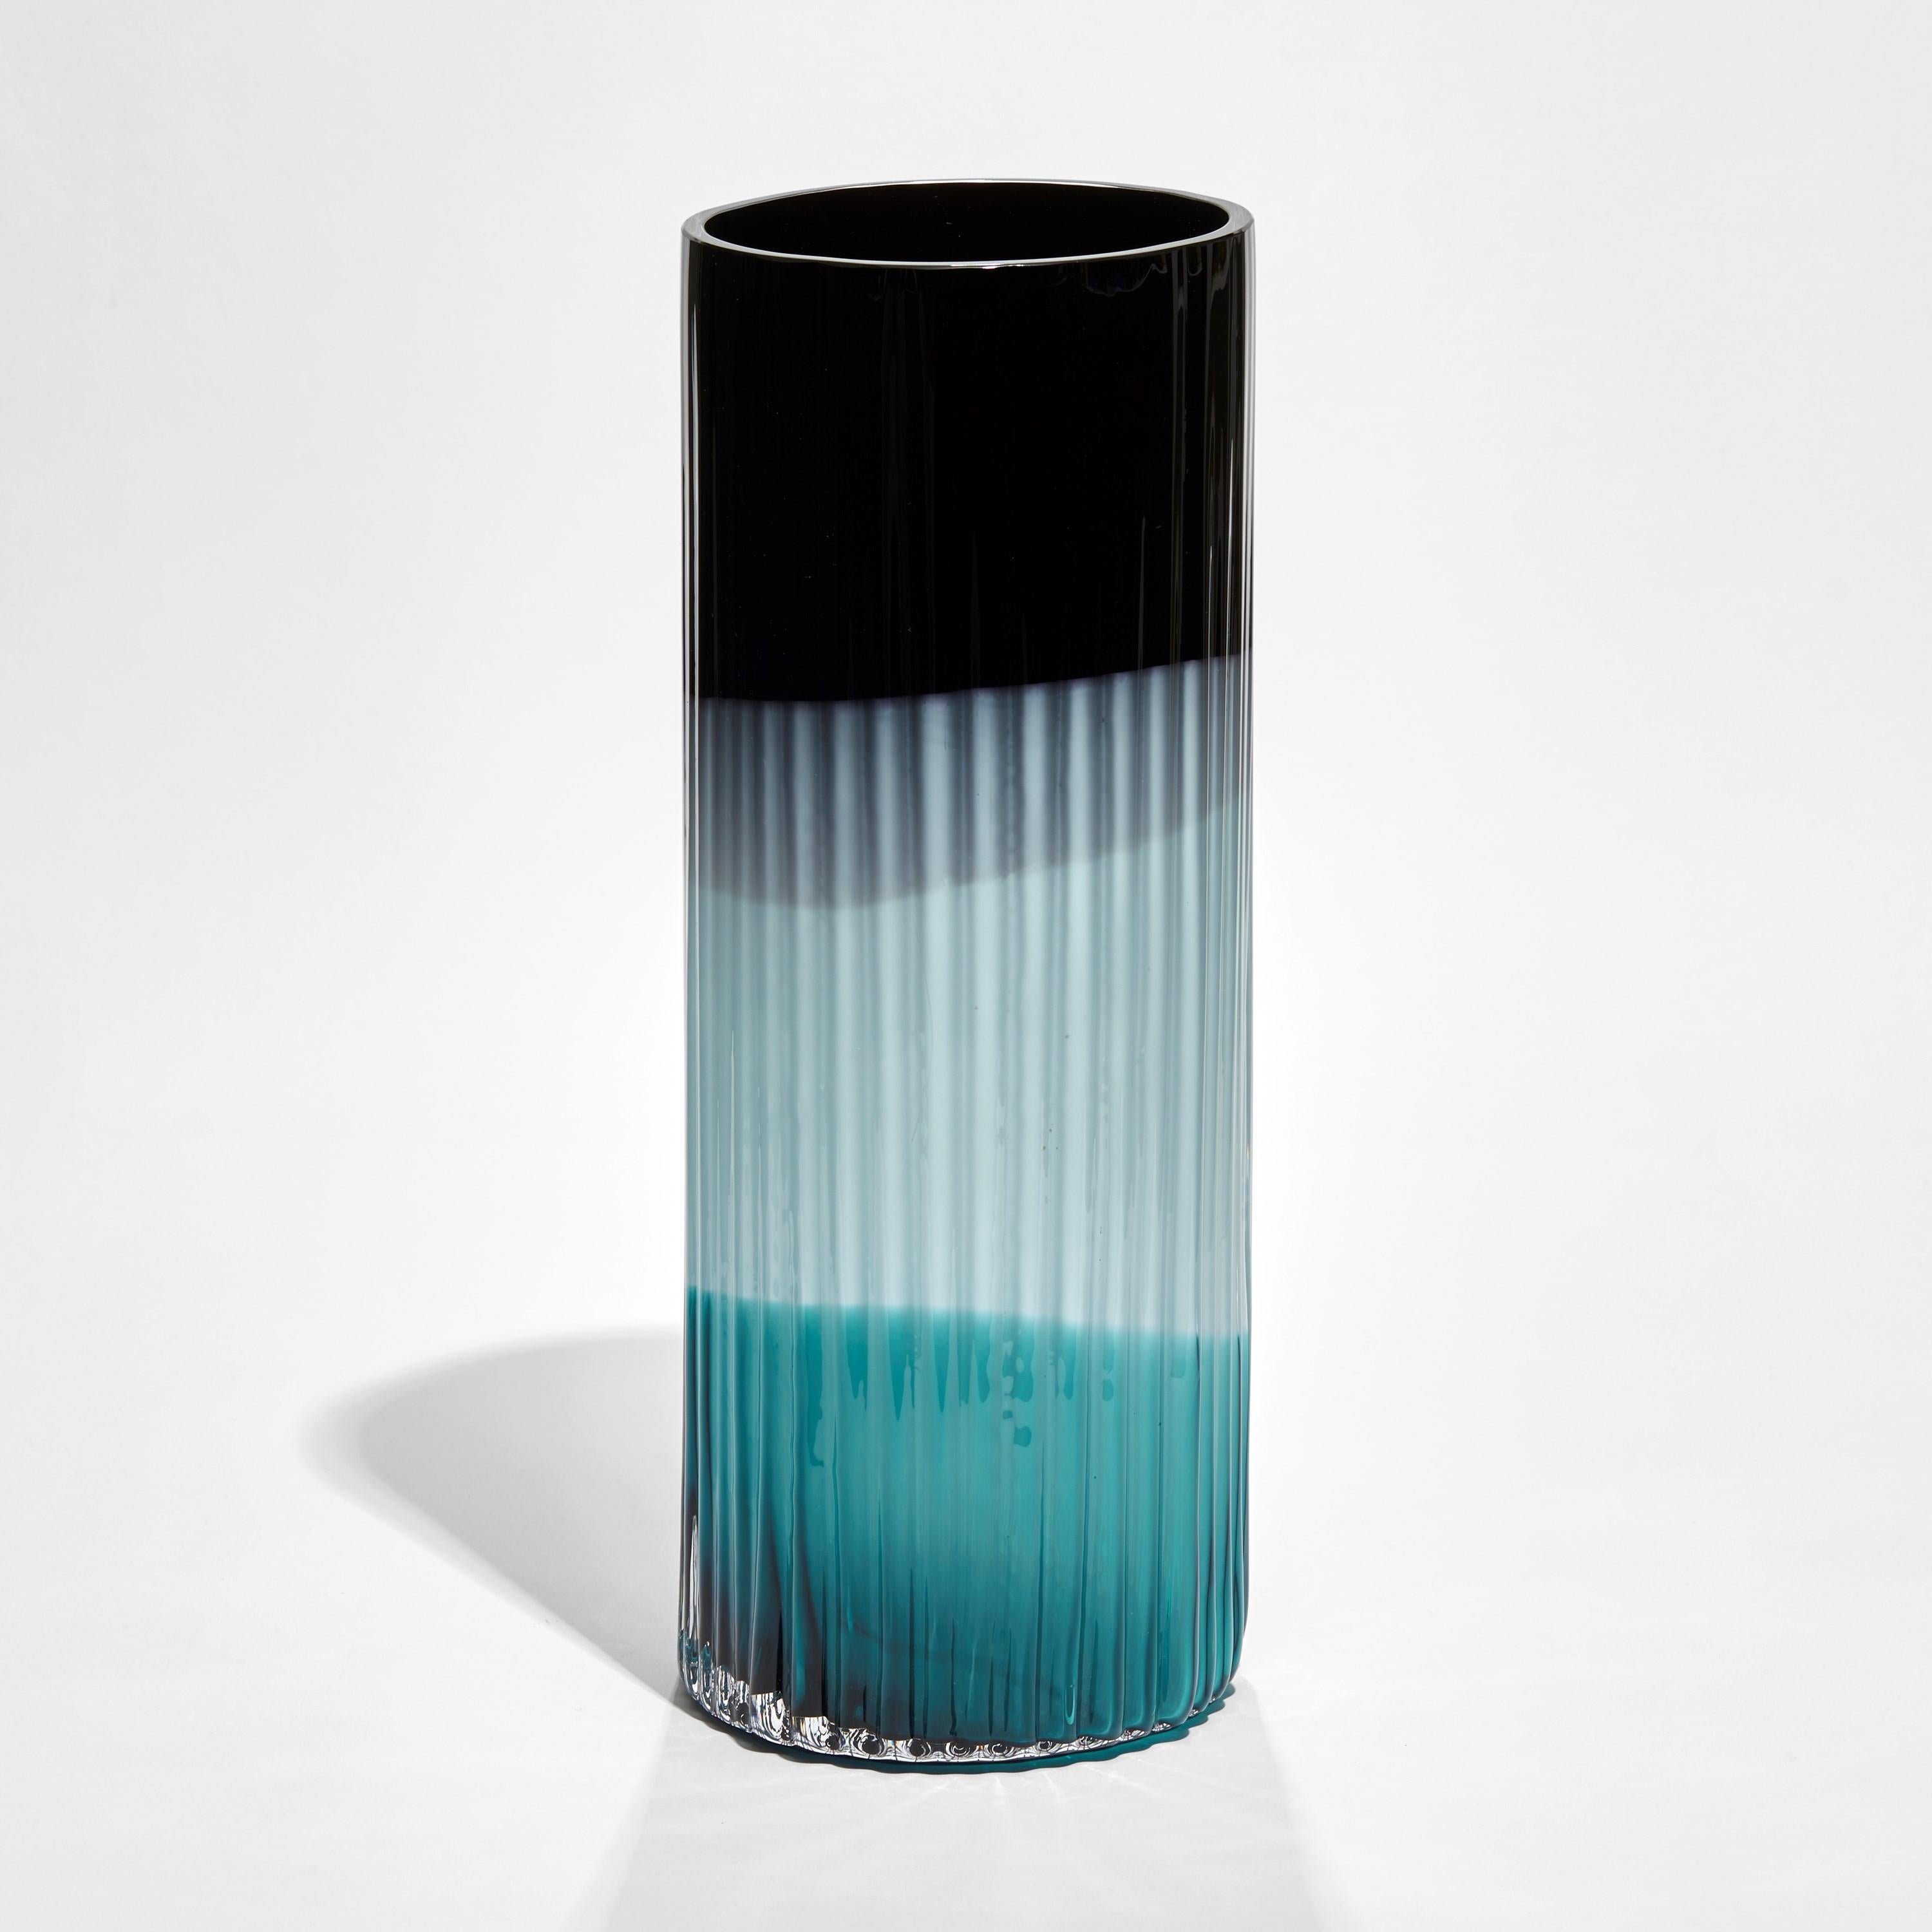 'Plissé vase in Black, Turquoise & Light Blue' is a limited edition vase by the Swedish artist and designer, Lena Bergström.

Created for 'Lena 25+', Bergström's 2022 solo exhibition celebrating the 25 years and more for which she has been designing